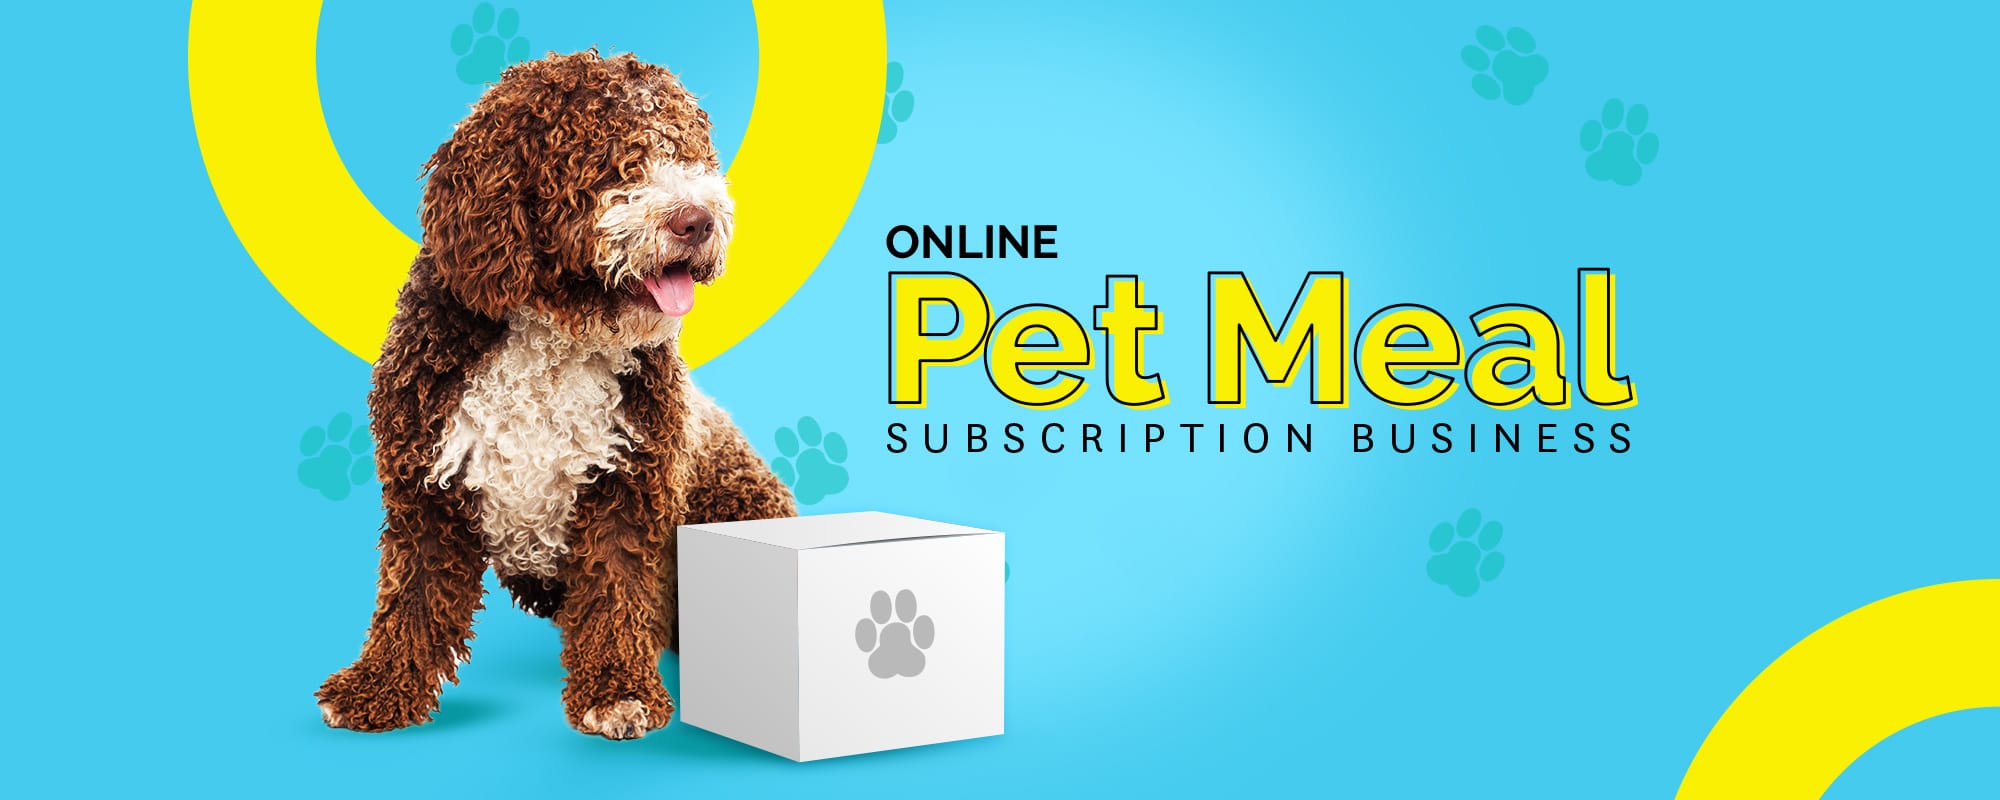 Business Model: Online Meal Delivery Subscription for Pets